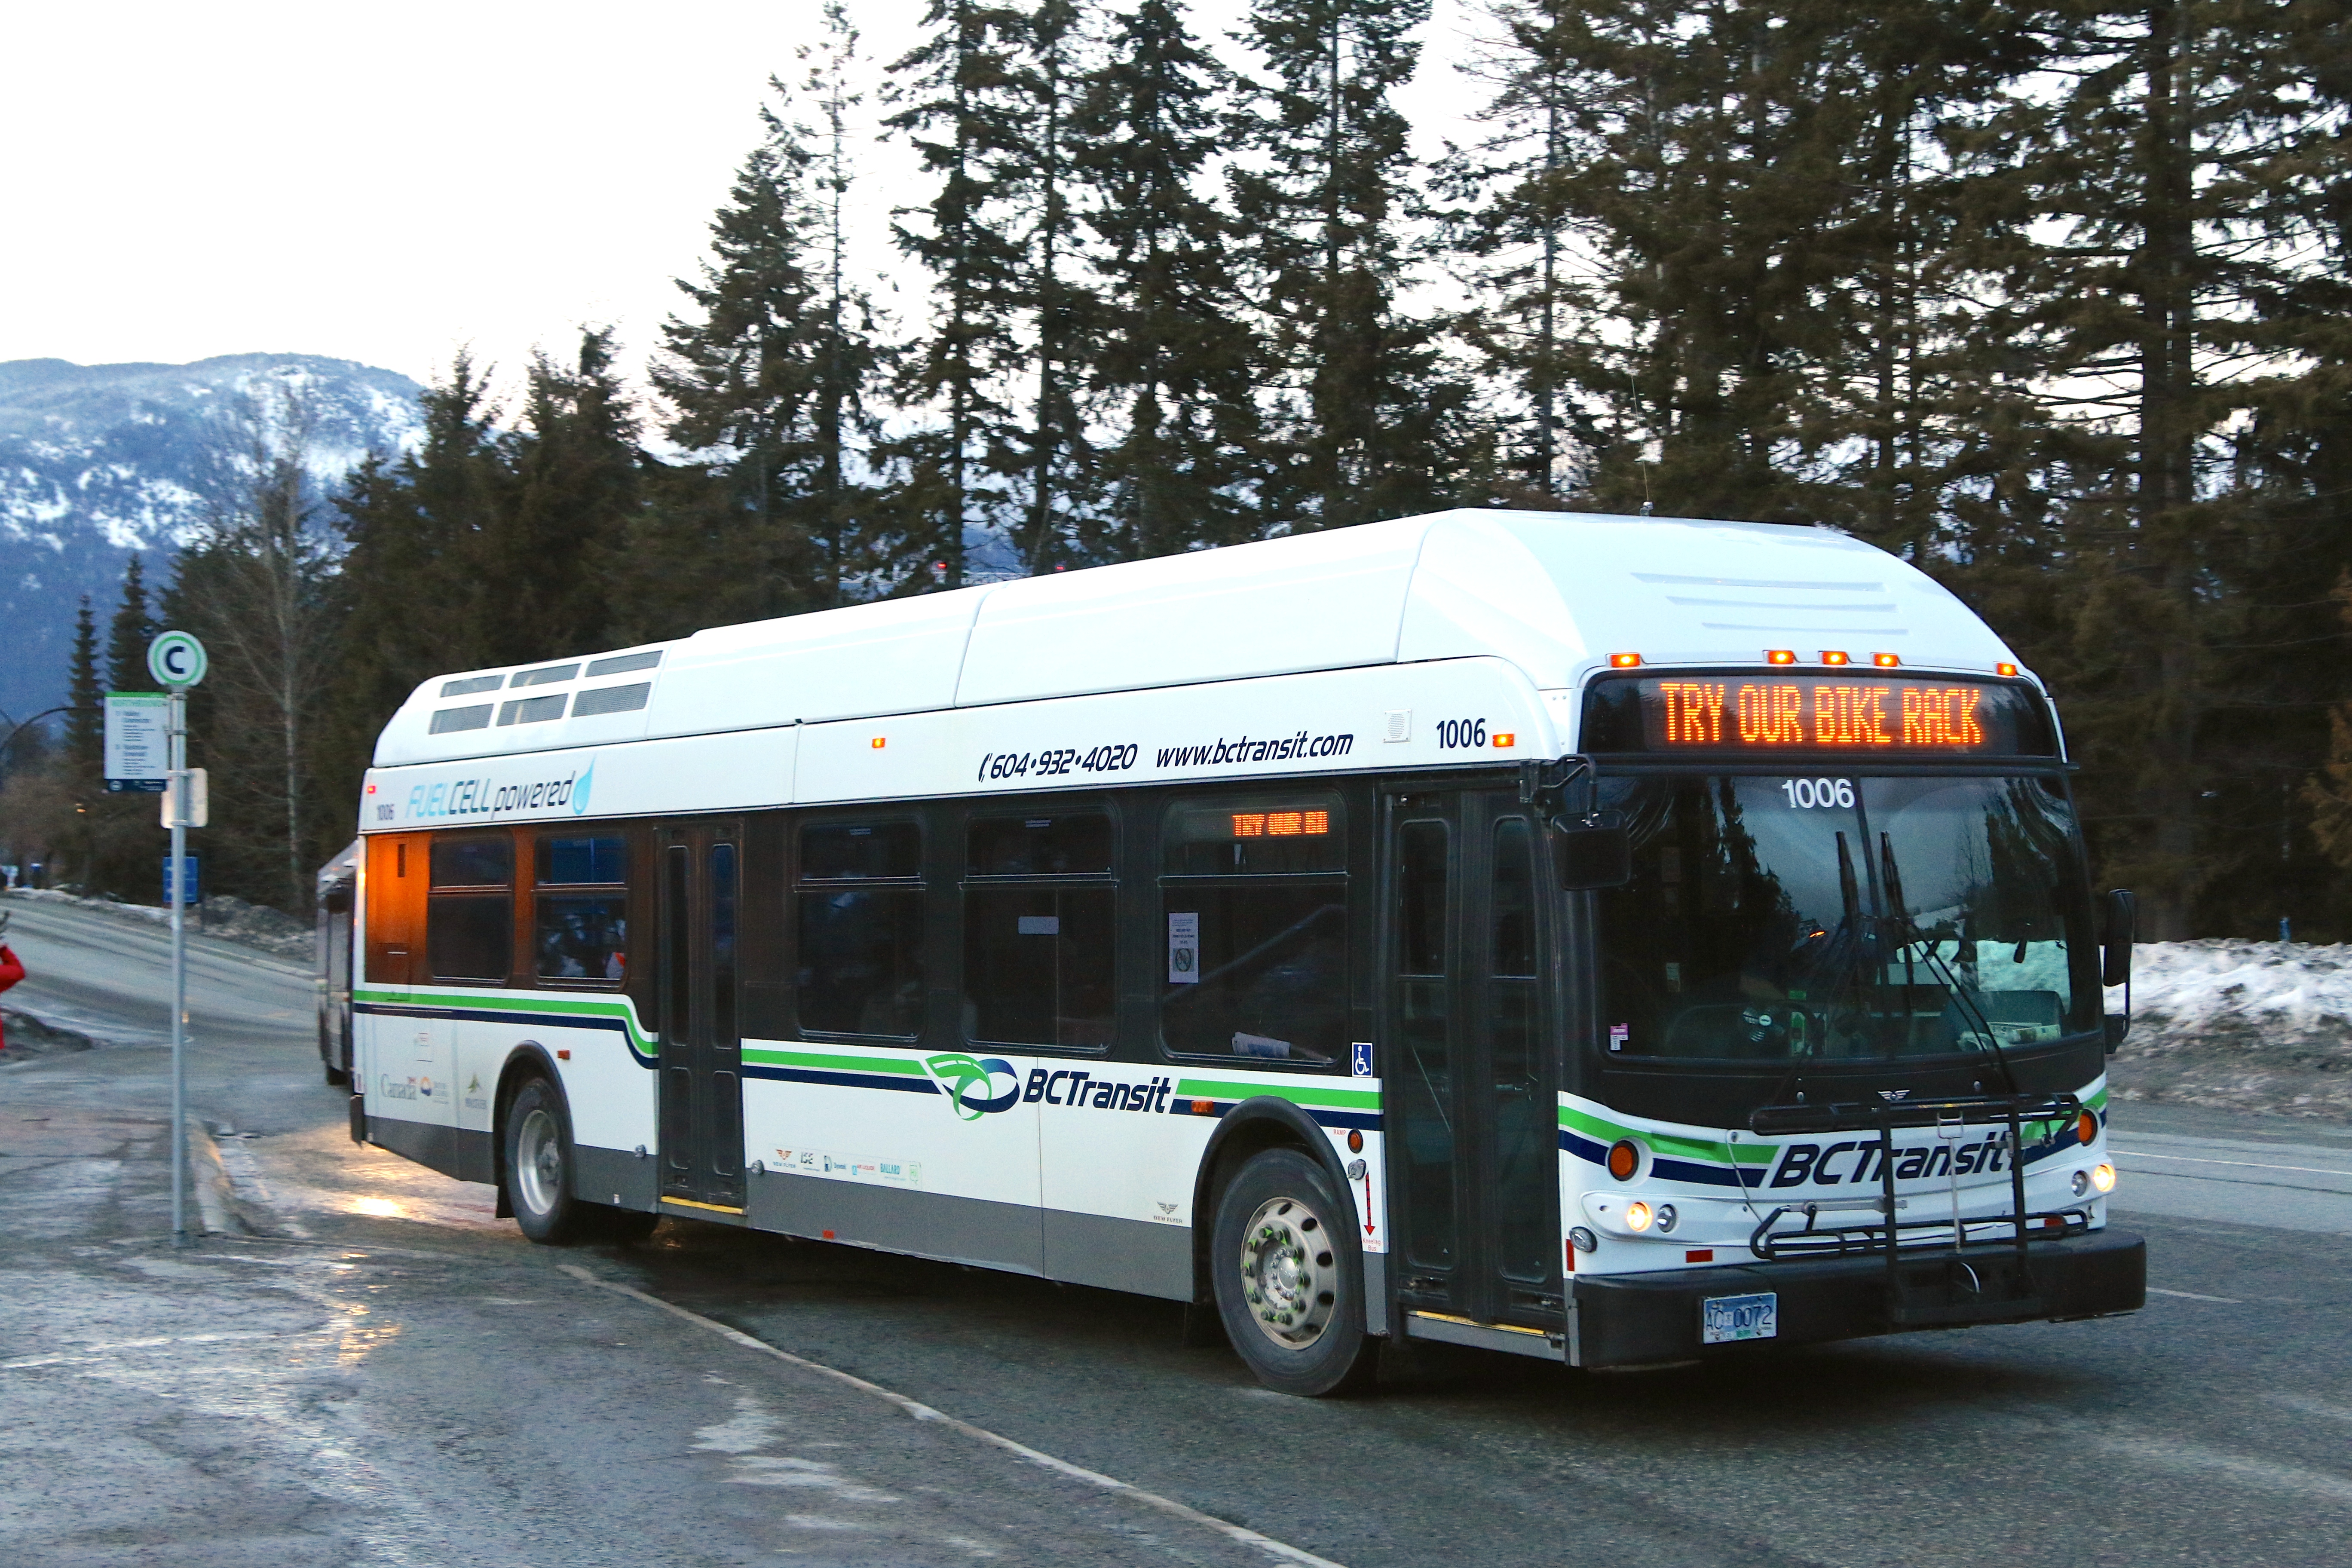 The end is near for Whistler’s hydrogen fuel cell buses